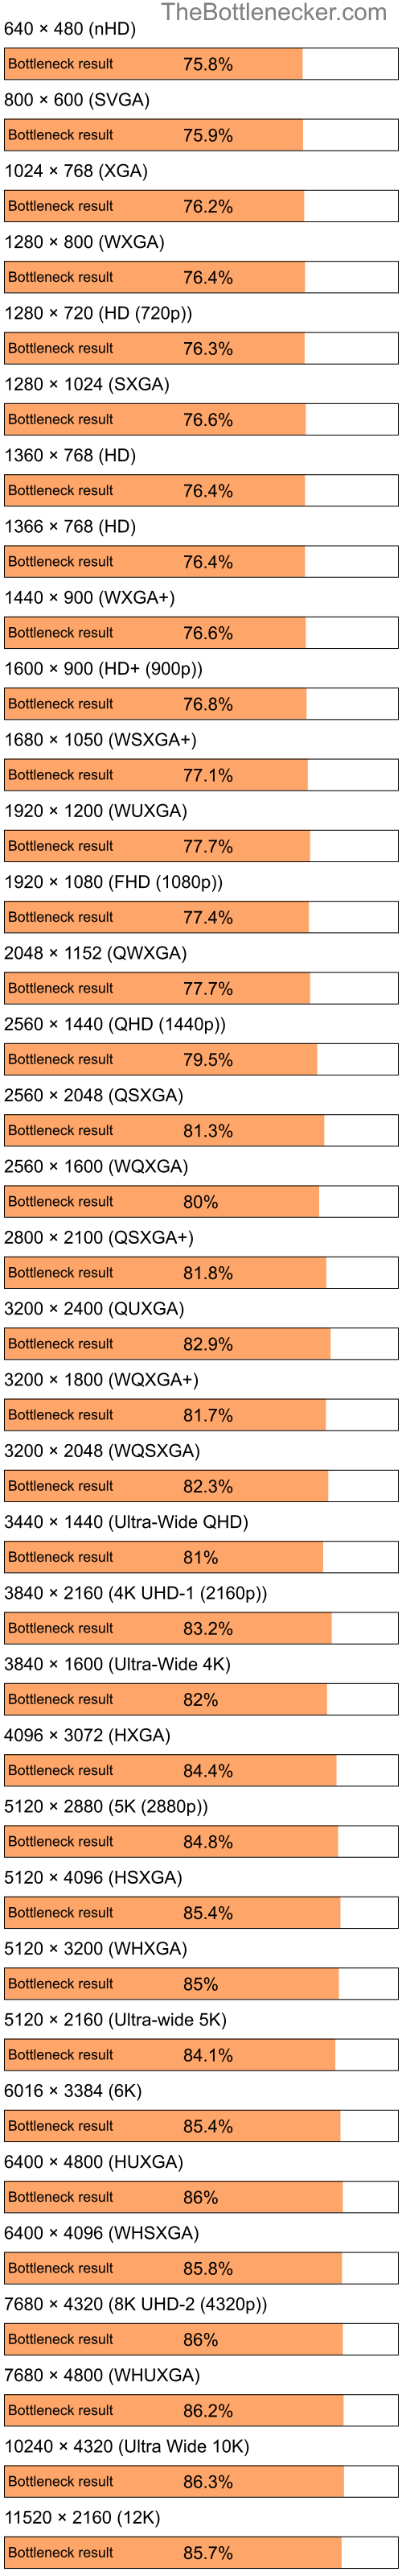 Bottleneck results by resolution for Intel Pentium 4 and AMD Mobility Radeon 9600 in General Tasks